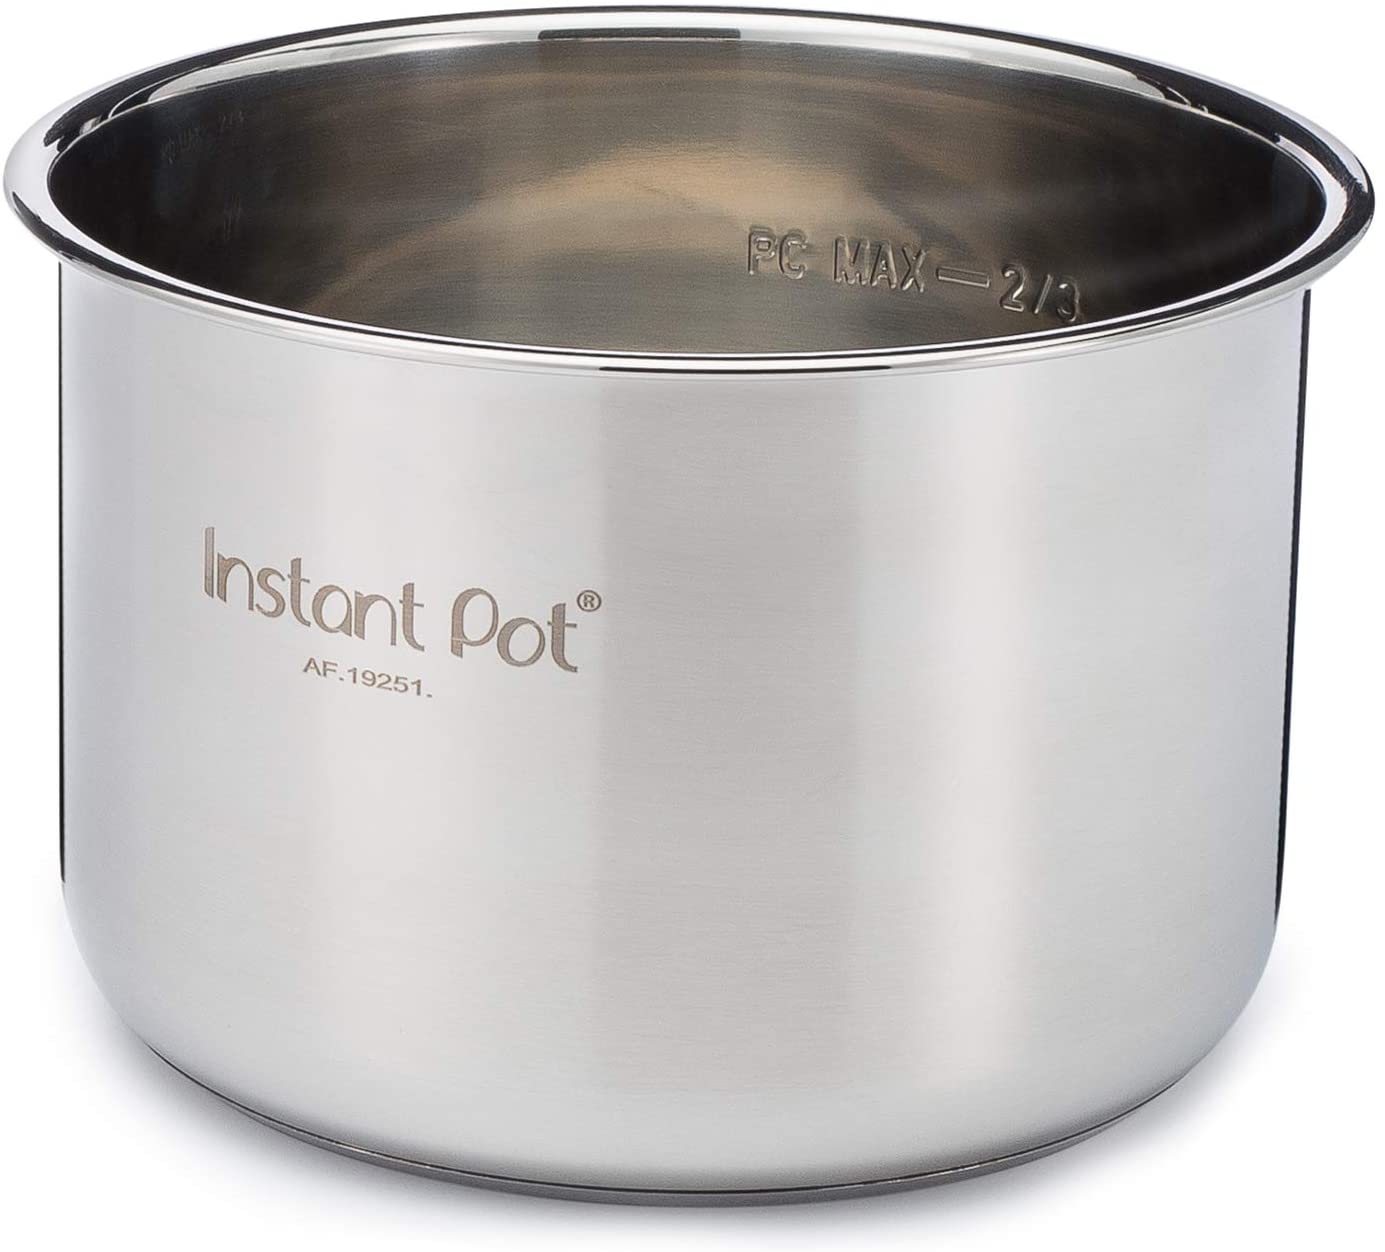 Instant Pot Stainless Steel Inner Cooking Pot - 6 Quart $19.98 6 Qt Stainless Steel Inner Pot